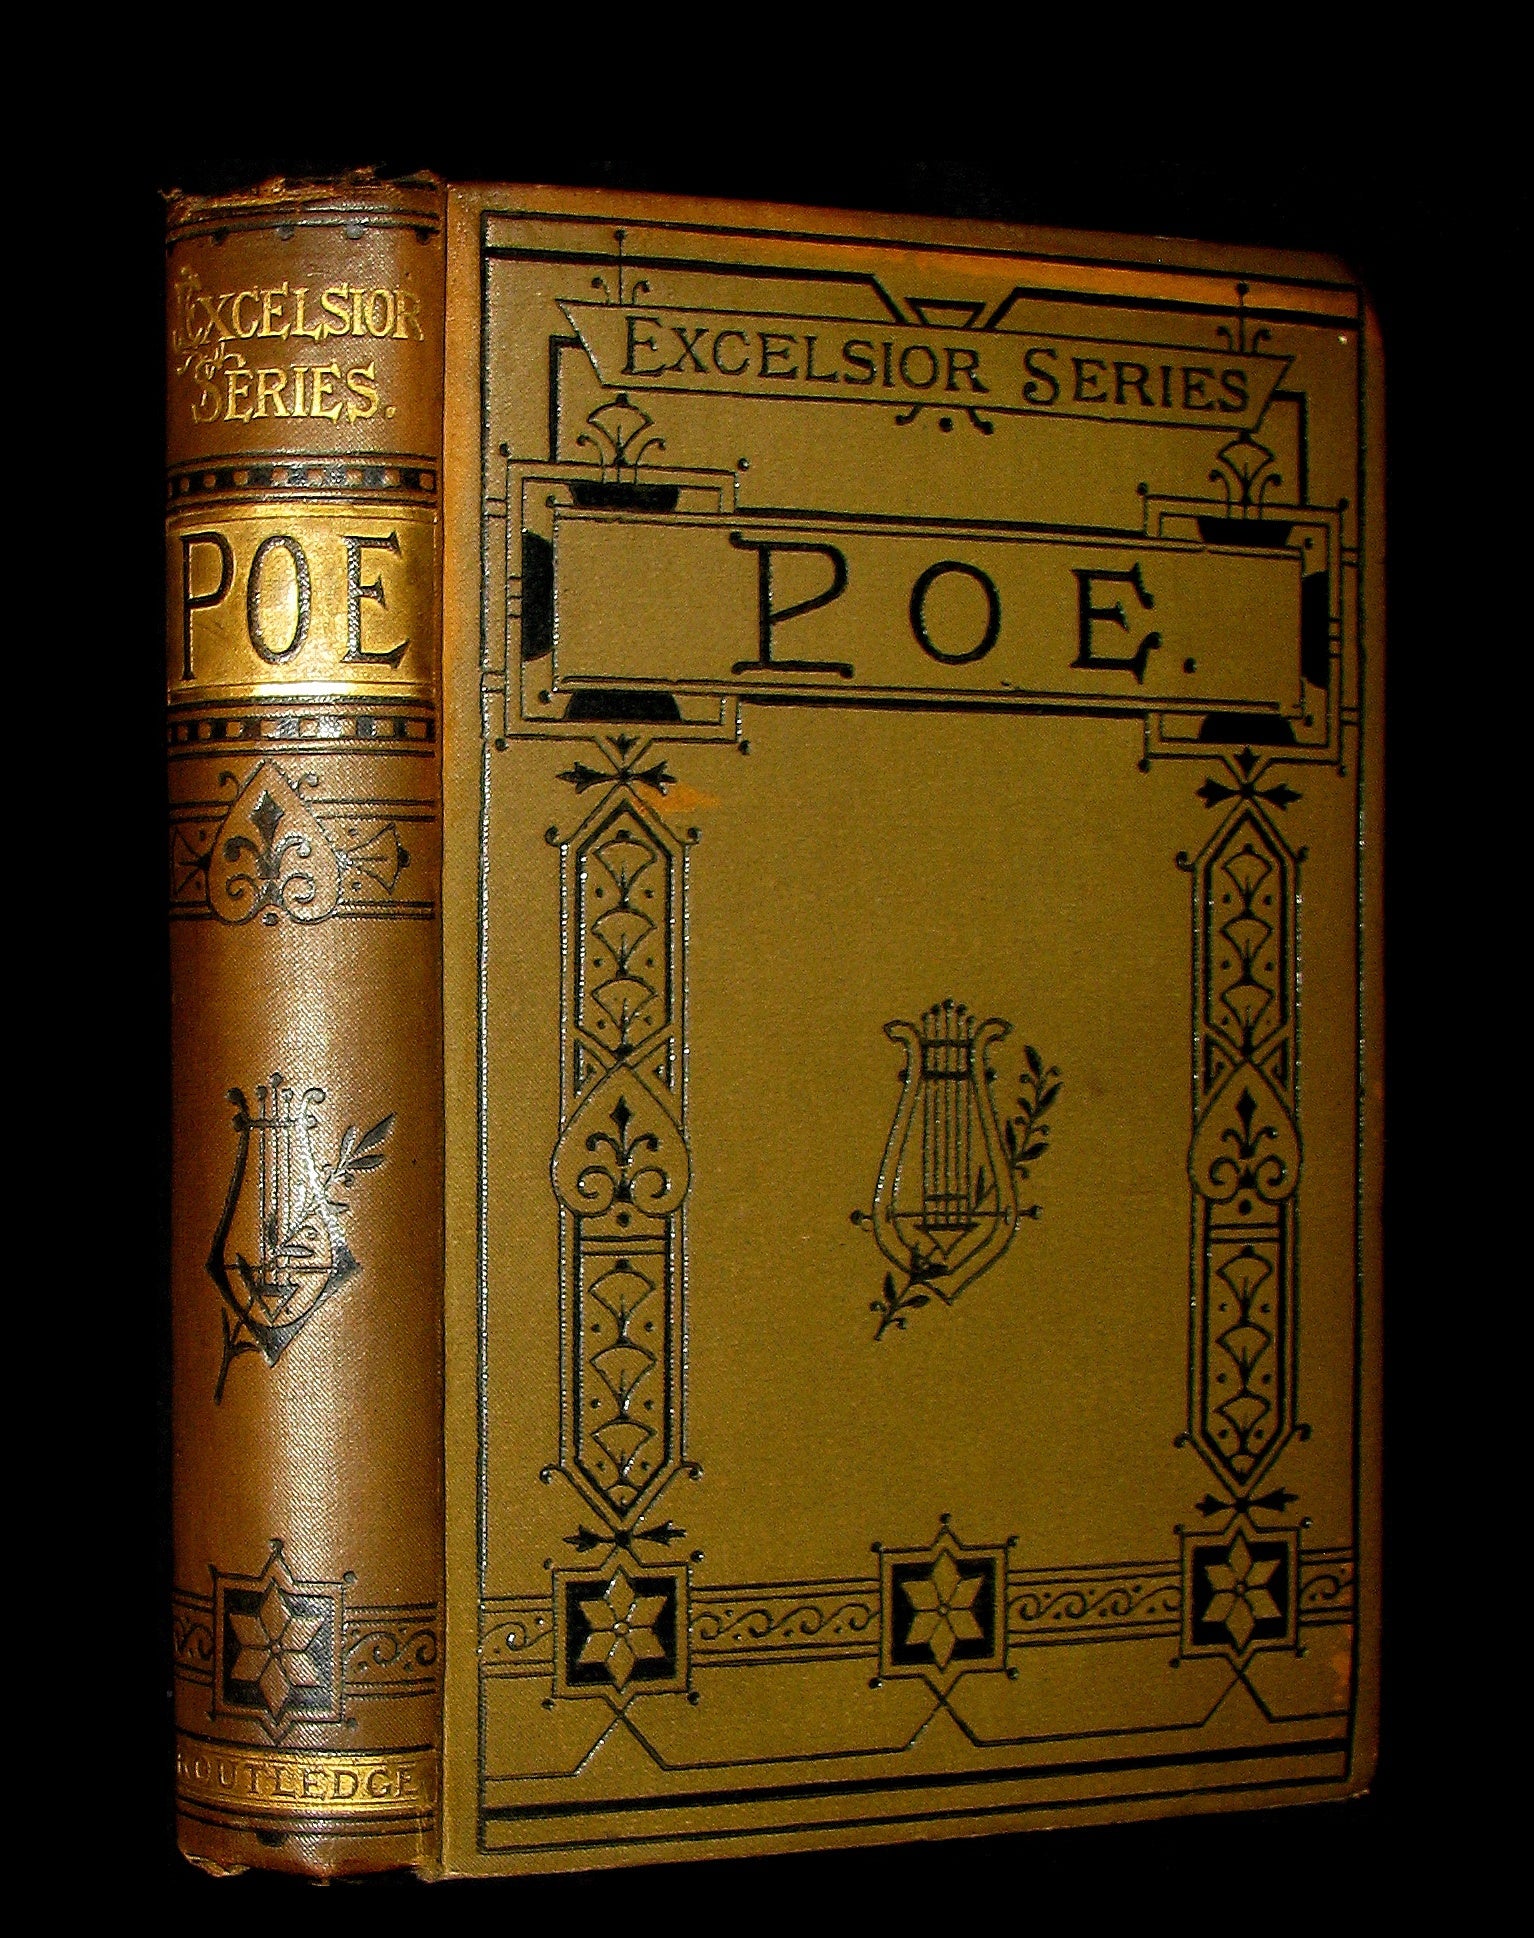 1890 Rare Victorian Book - Complete Poems by Edgar Allan POE (The Raven, Lenore, Ulalume, ...)